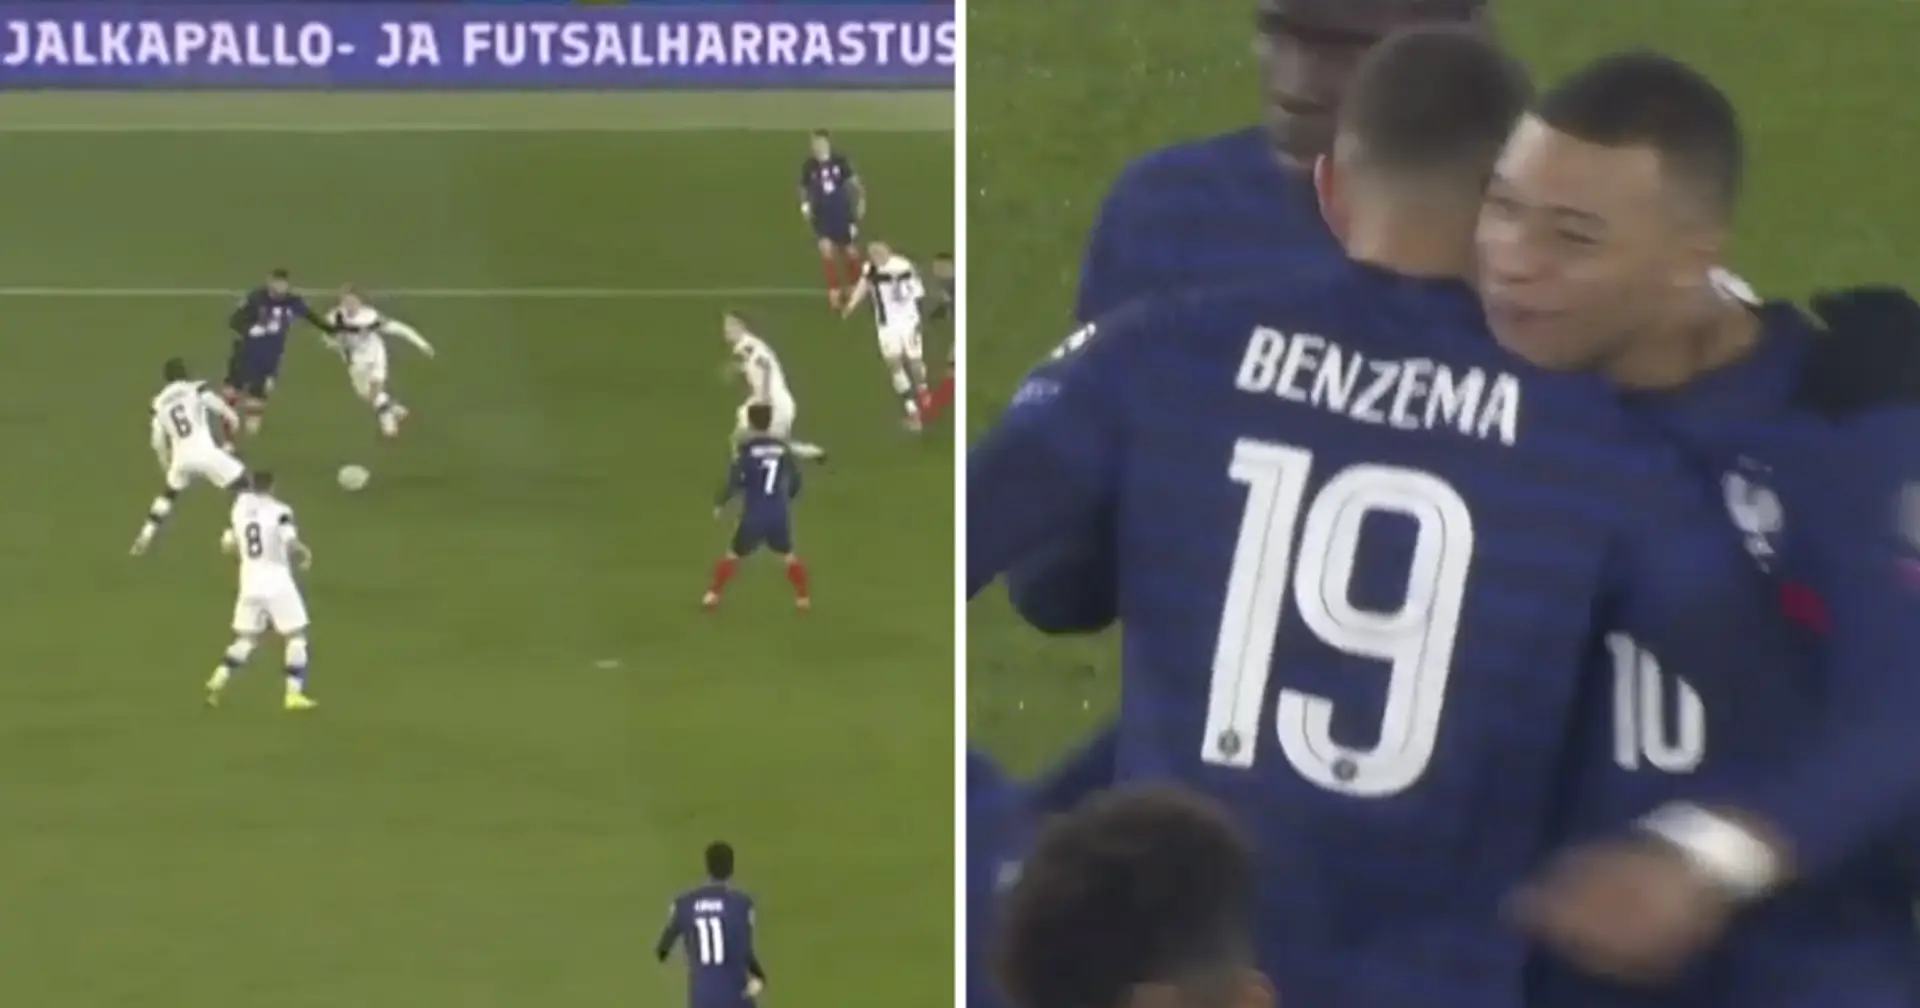 Benzema links up with Mbappe again to score stunning goal for France